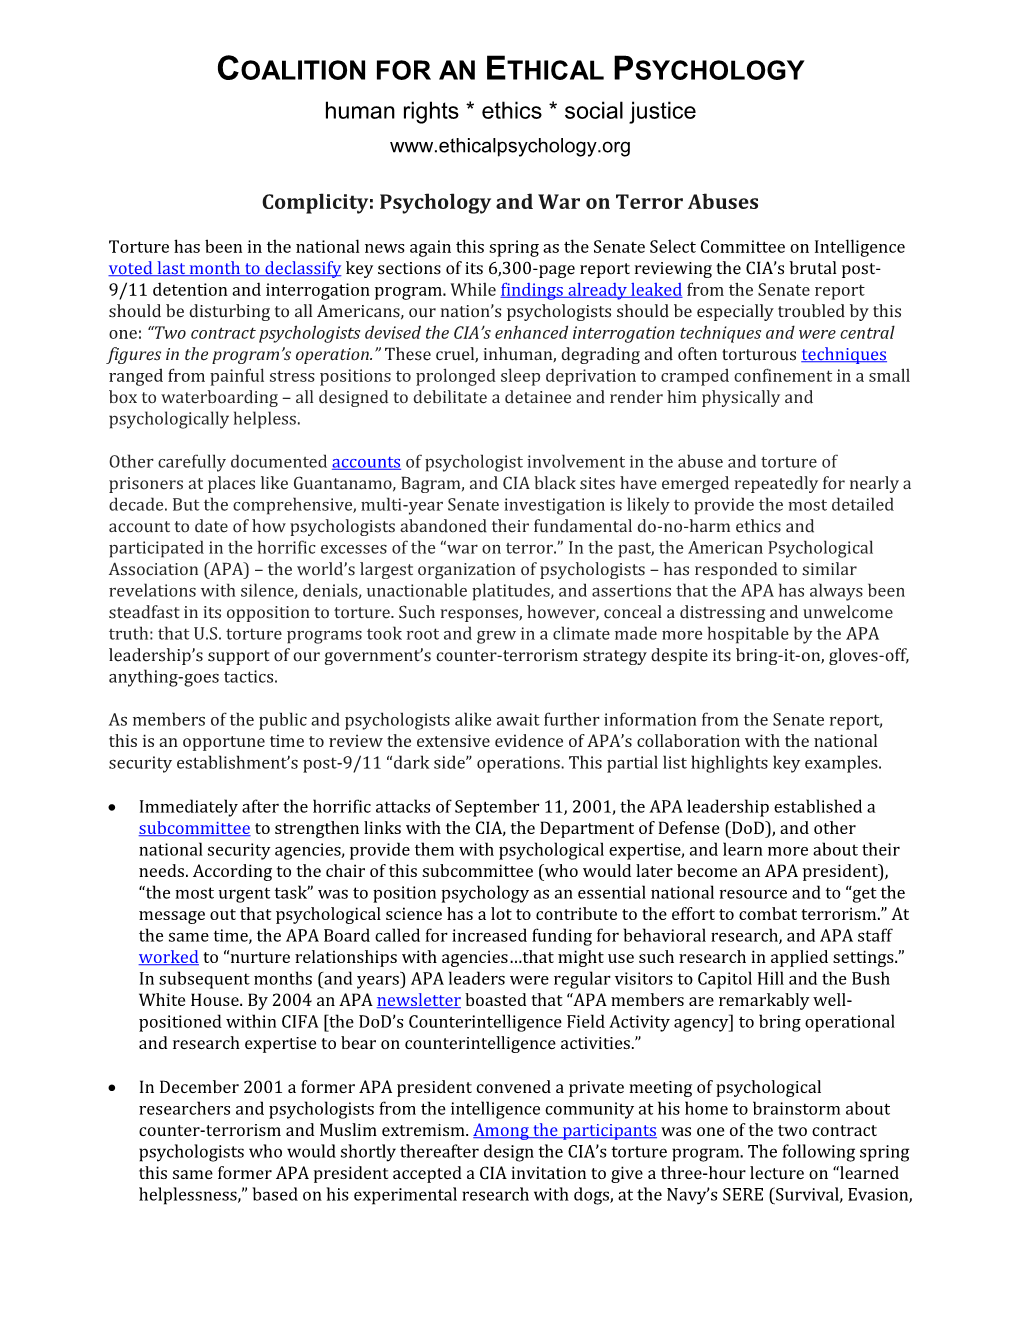 Complicity: Psychology and War on Terror Abuses